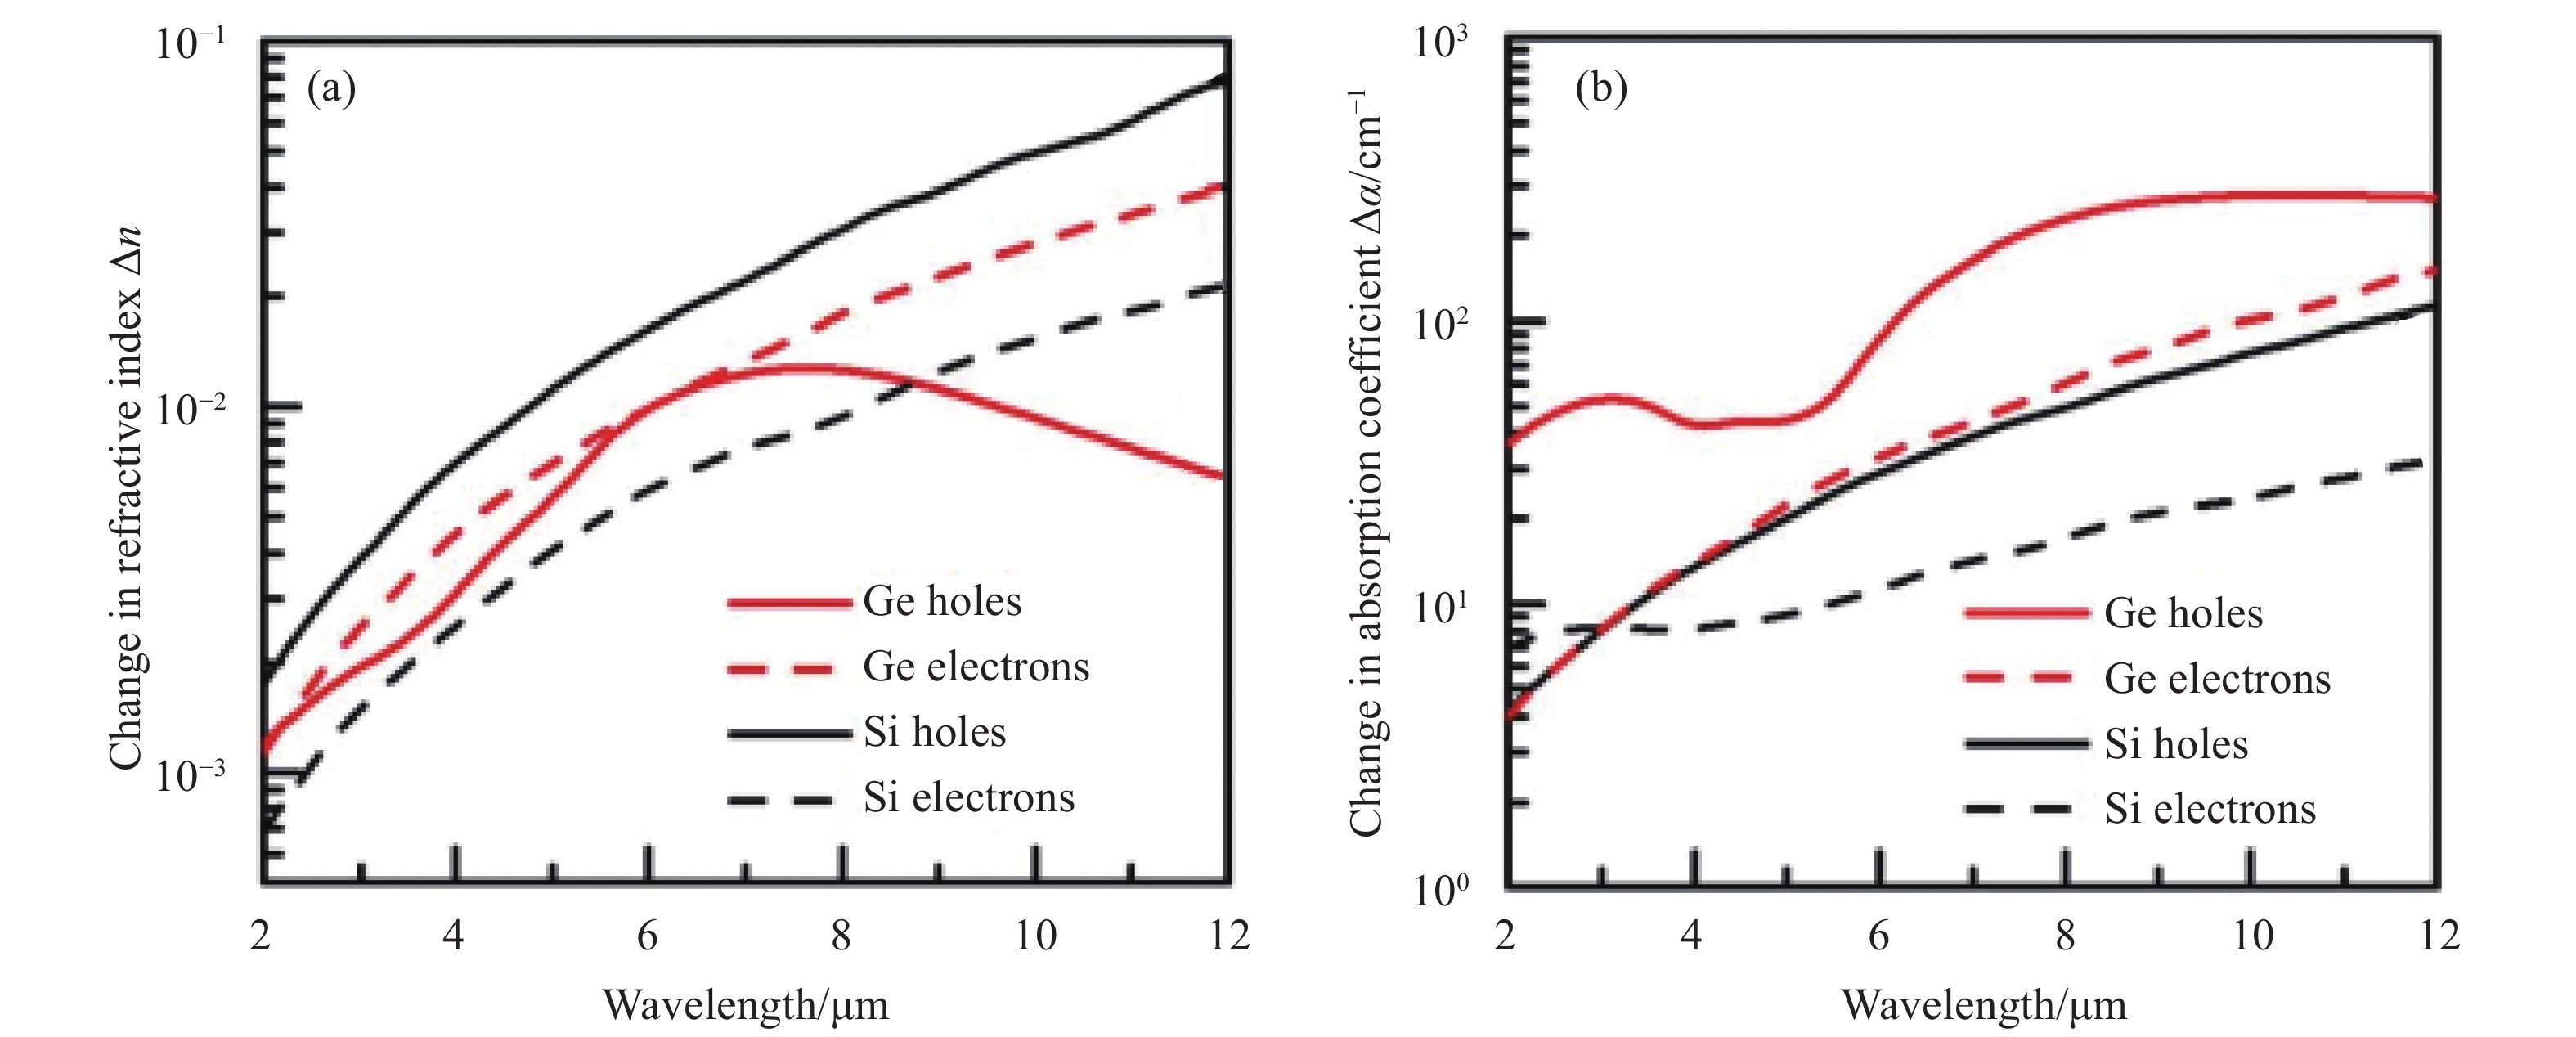 Comparisons of (a) change in refractive index and (b) change in absorption coefficient at in Si and Ge materials[20]